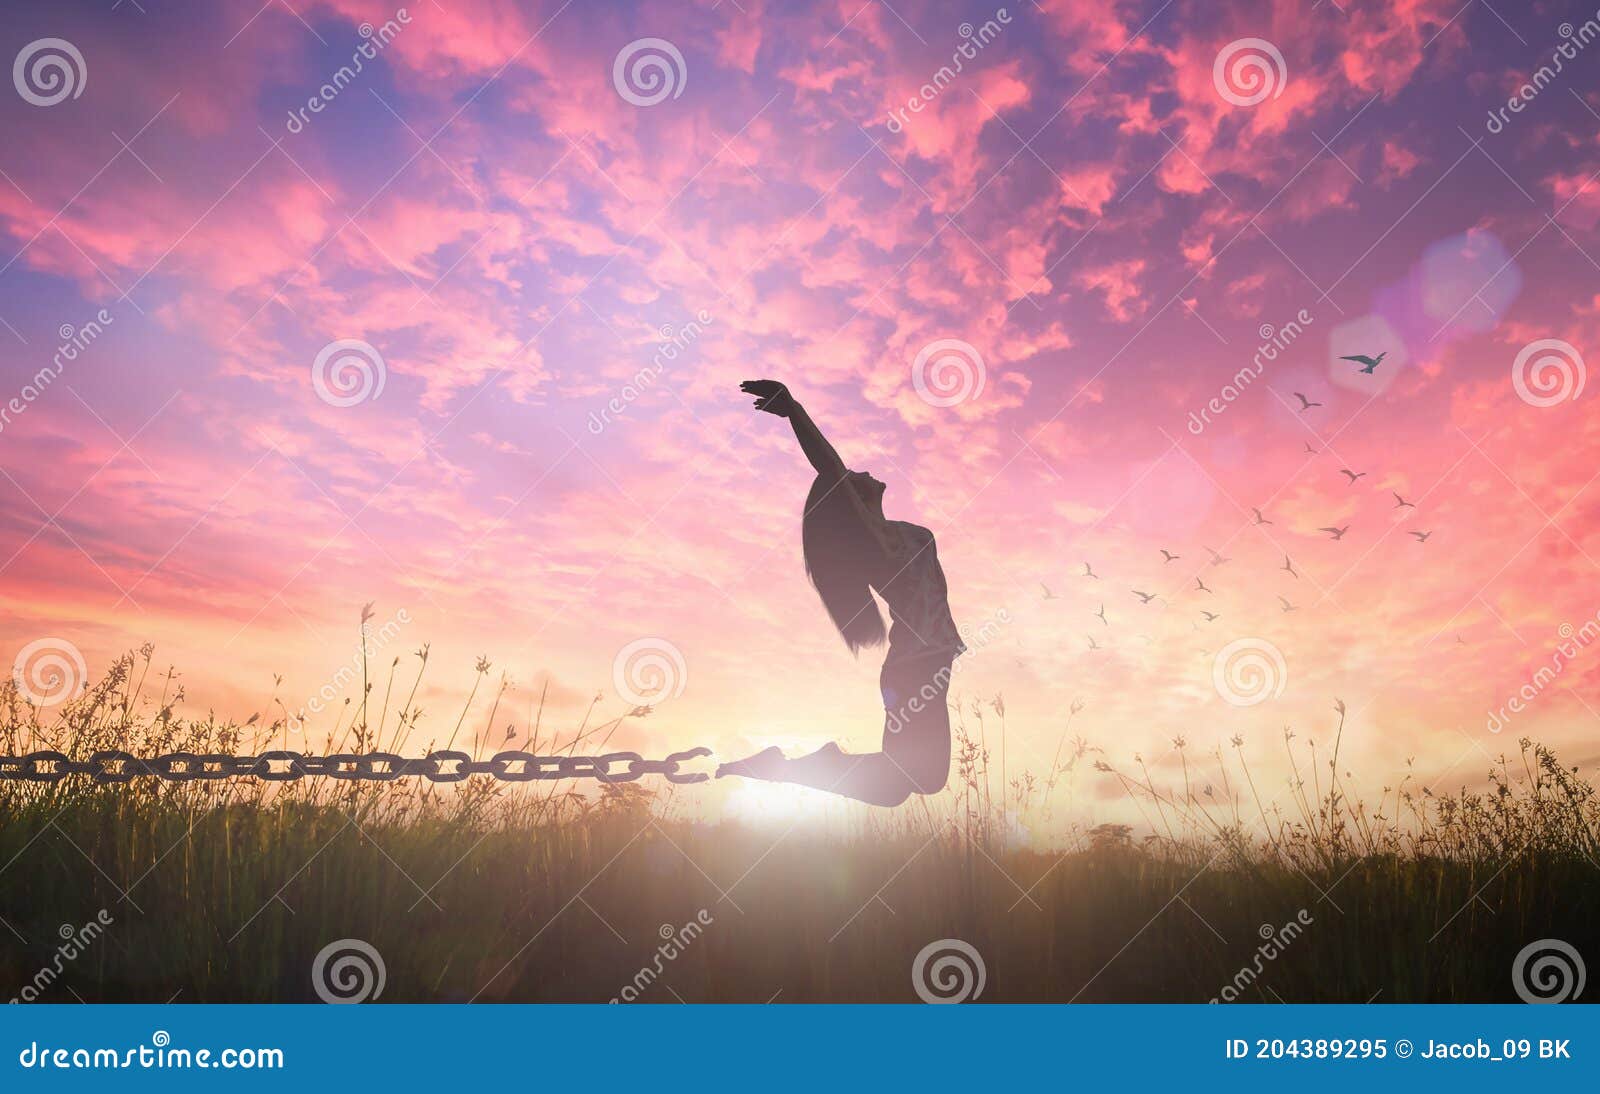 freedom concept of woman jumping and broken chains